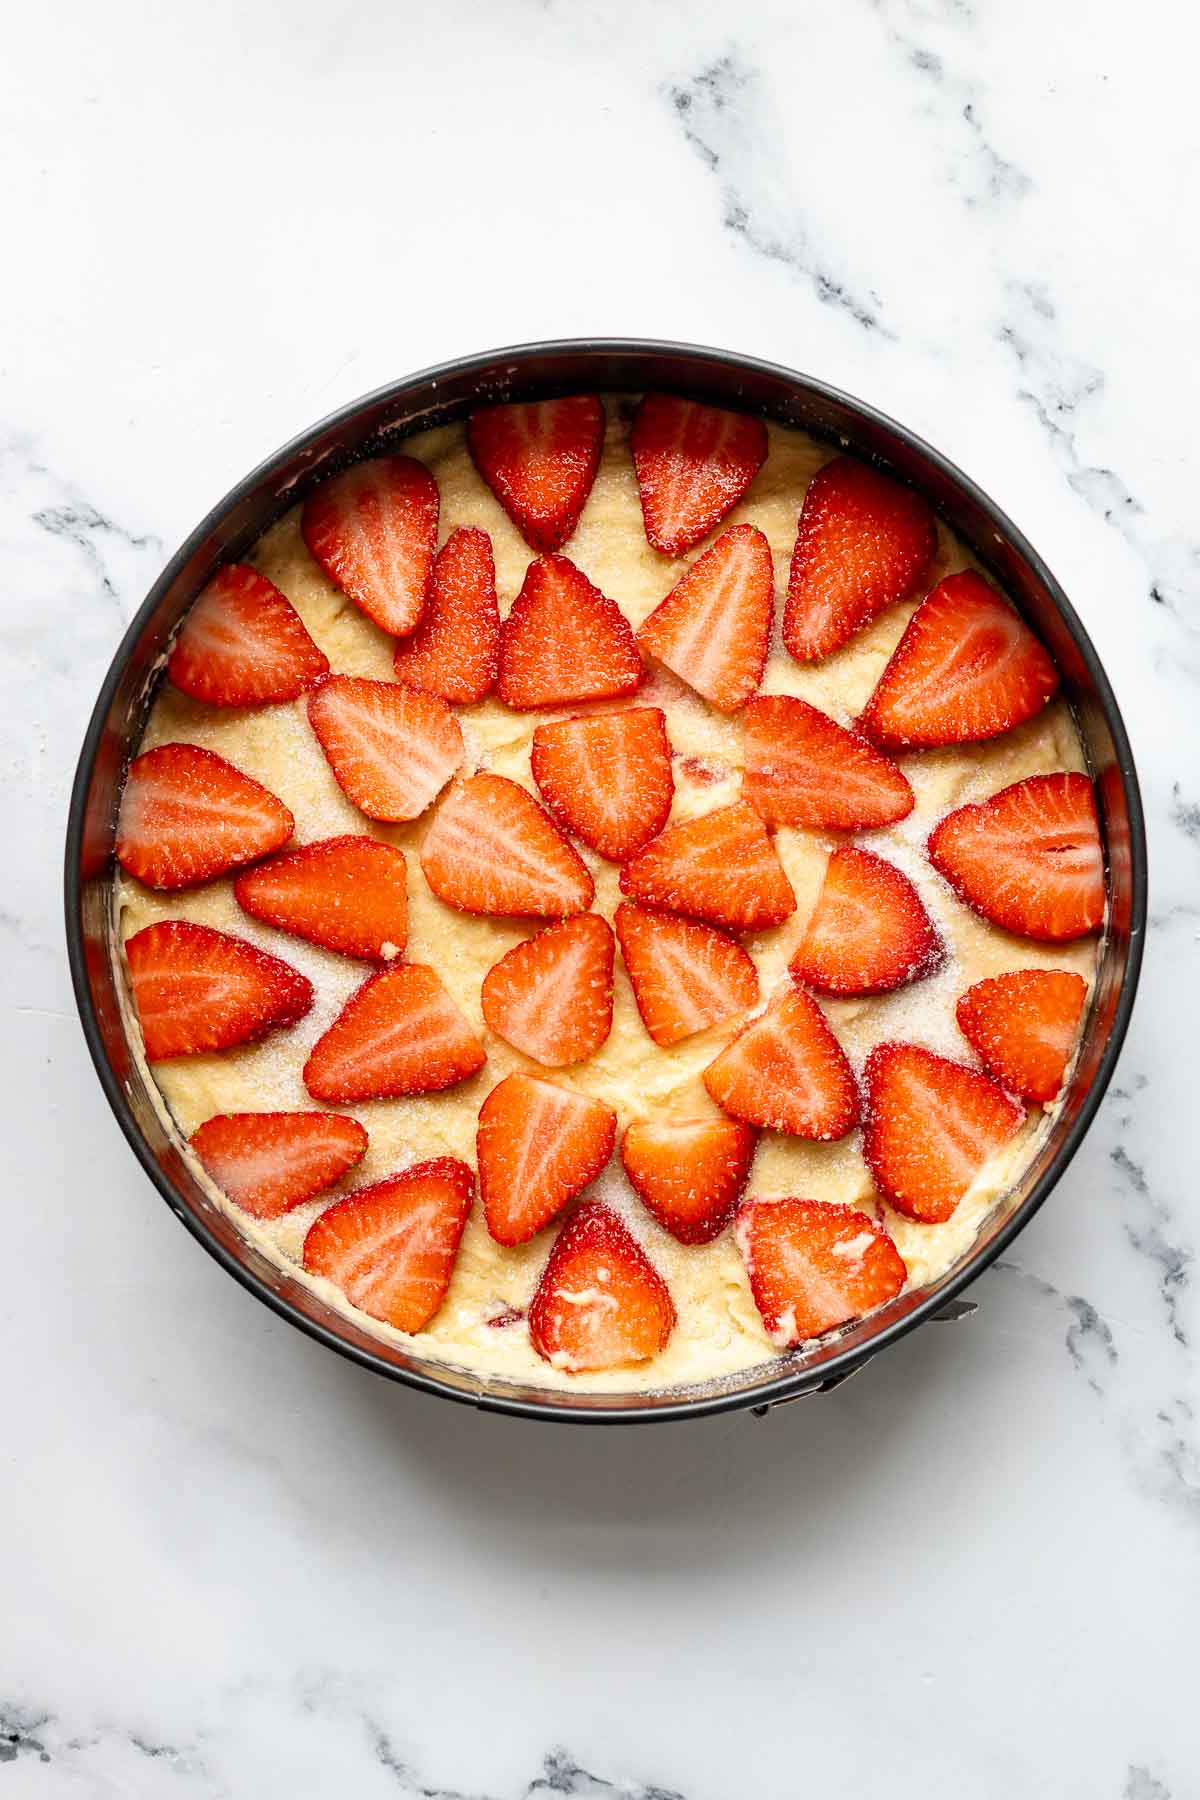 preparation steps for cake - strawberries on top